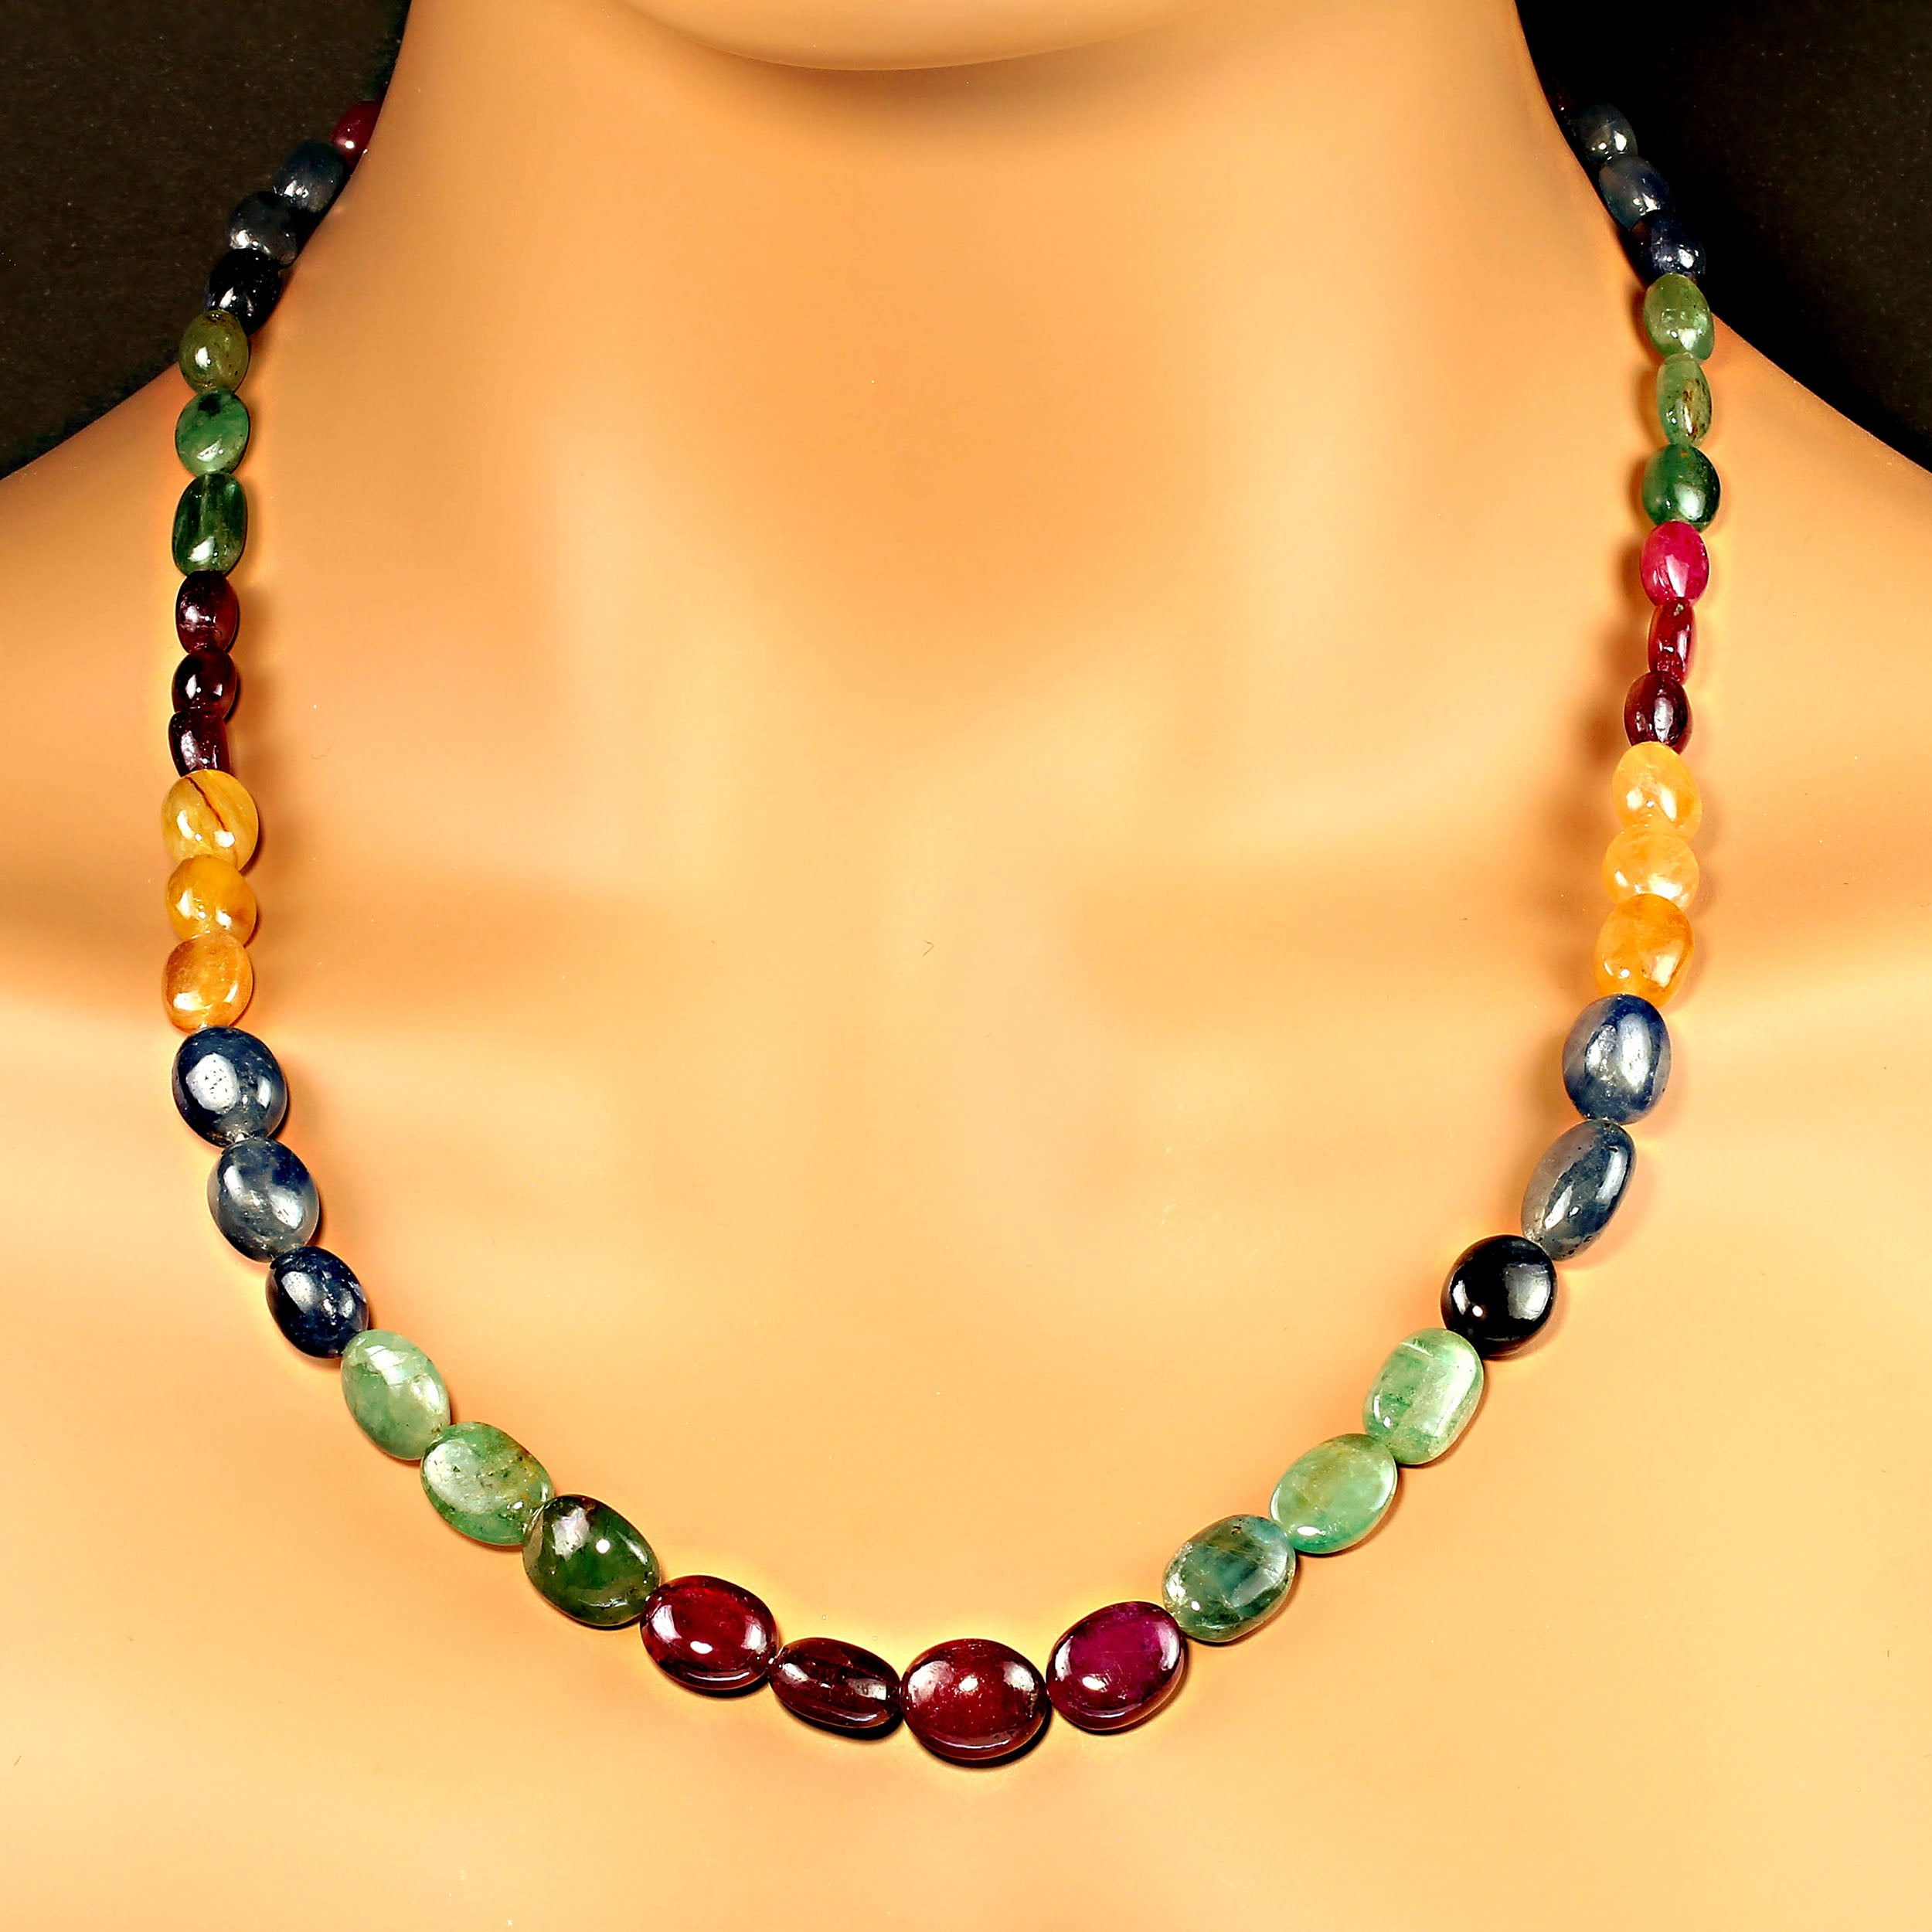 AJD 19 Inch Multi Color Beaded Sapphire Necklace   Great Gift!